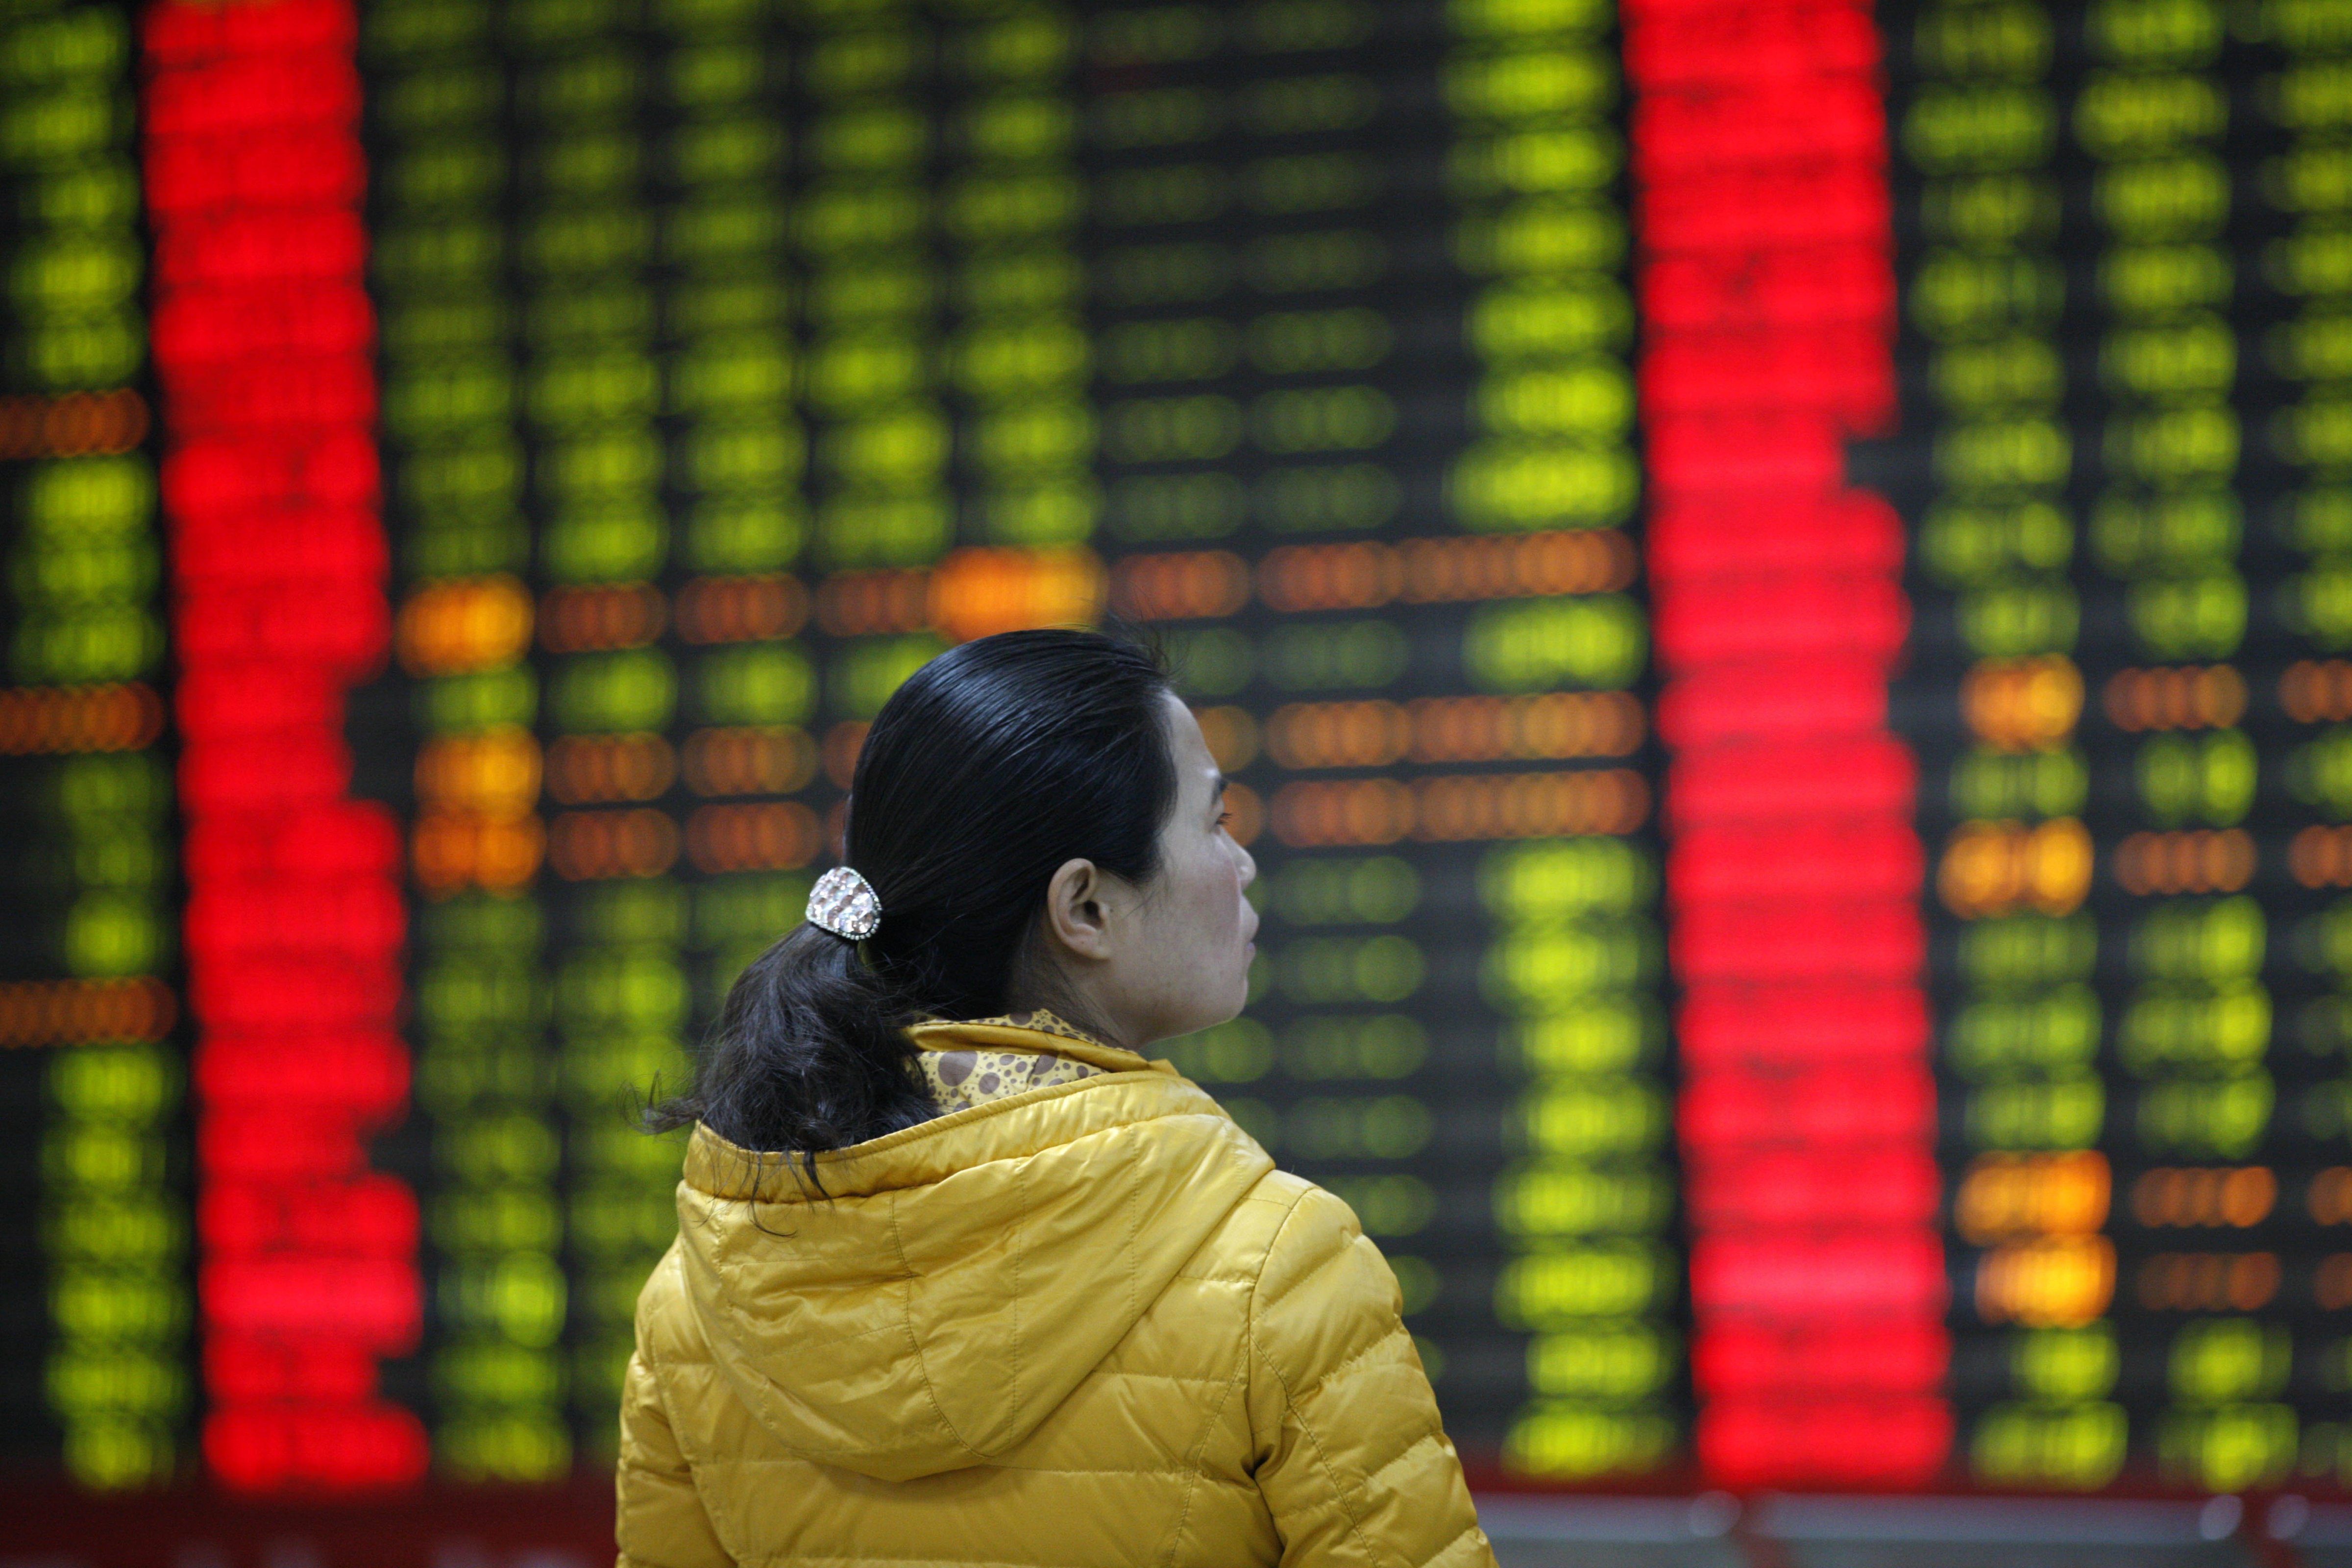 China's entire equity market was shuttered within half an hour